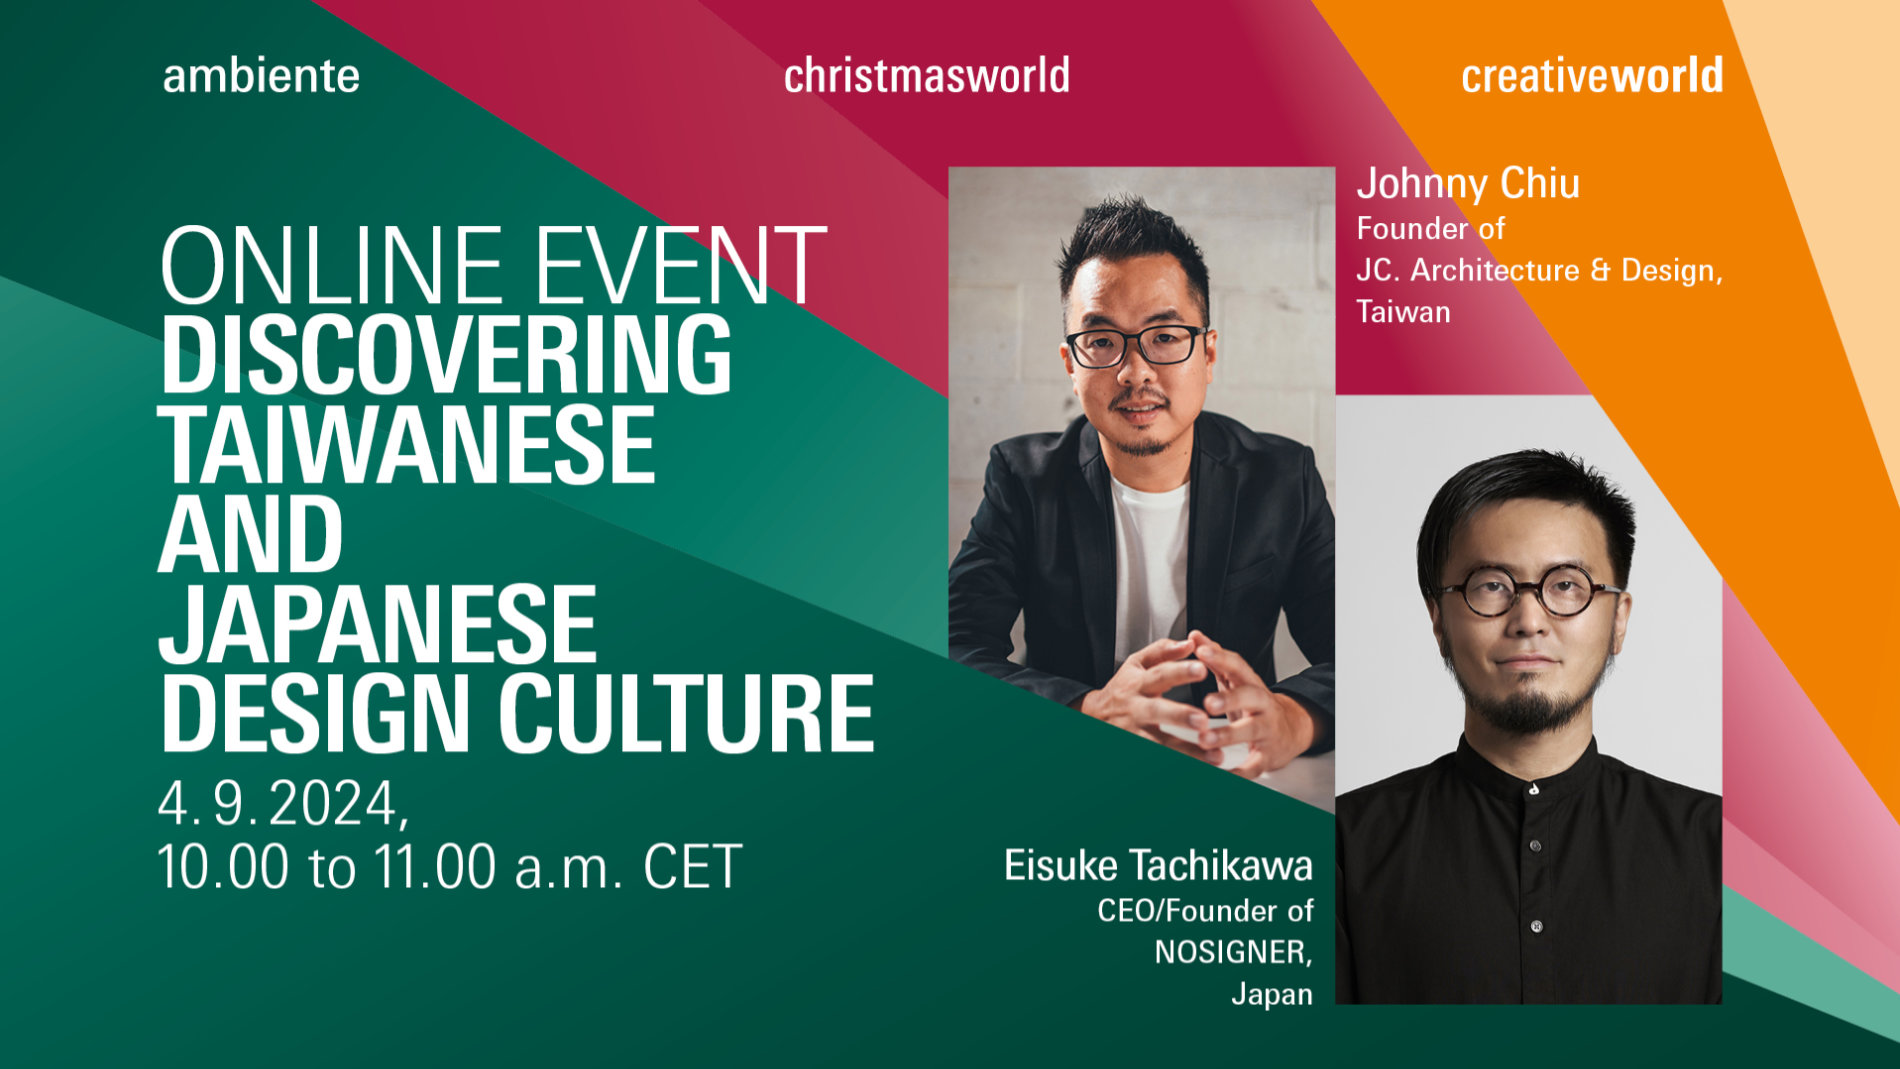 webinar: Discovering Taiwanese and Japanese design culture  with Johnny Chiu, Founder of JC. Architecture & Design (Taiwan) and Eisuke Tachikawa, CEO/Founder of NOSIGNER (Japan): 4. September 2024, 10.00 to 11.00 a.m. CET